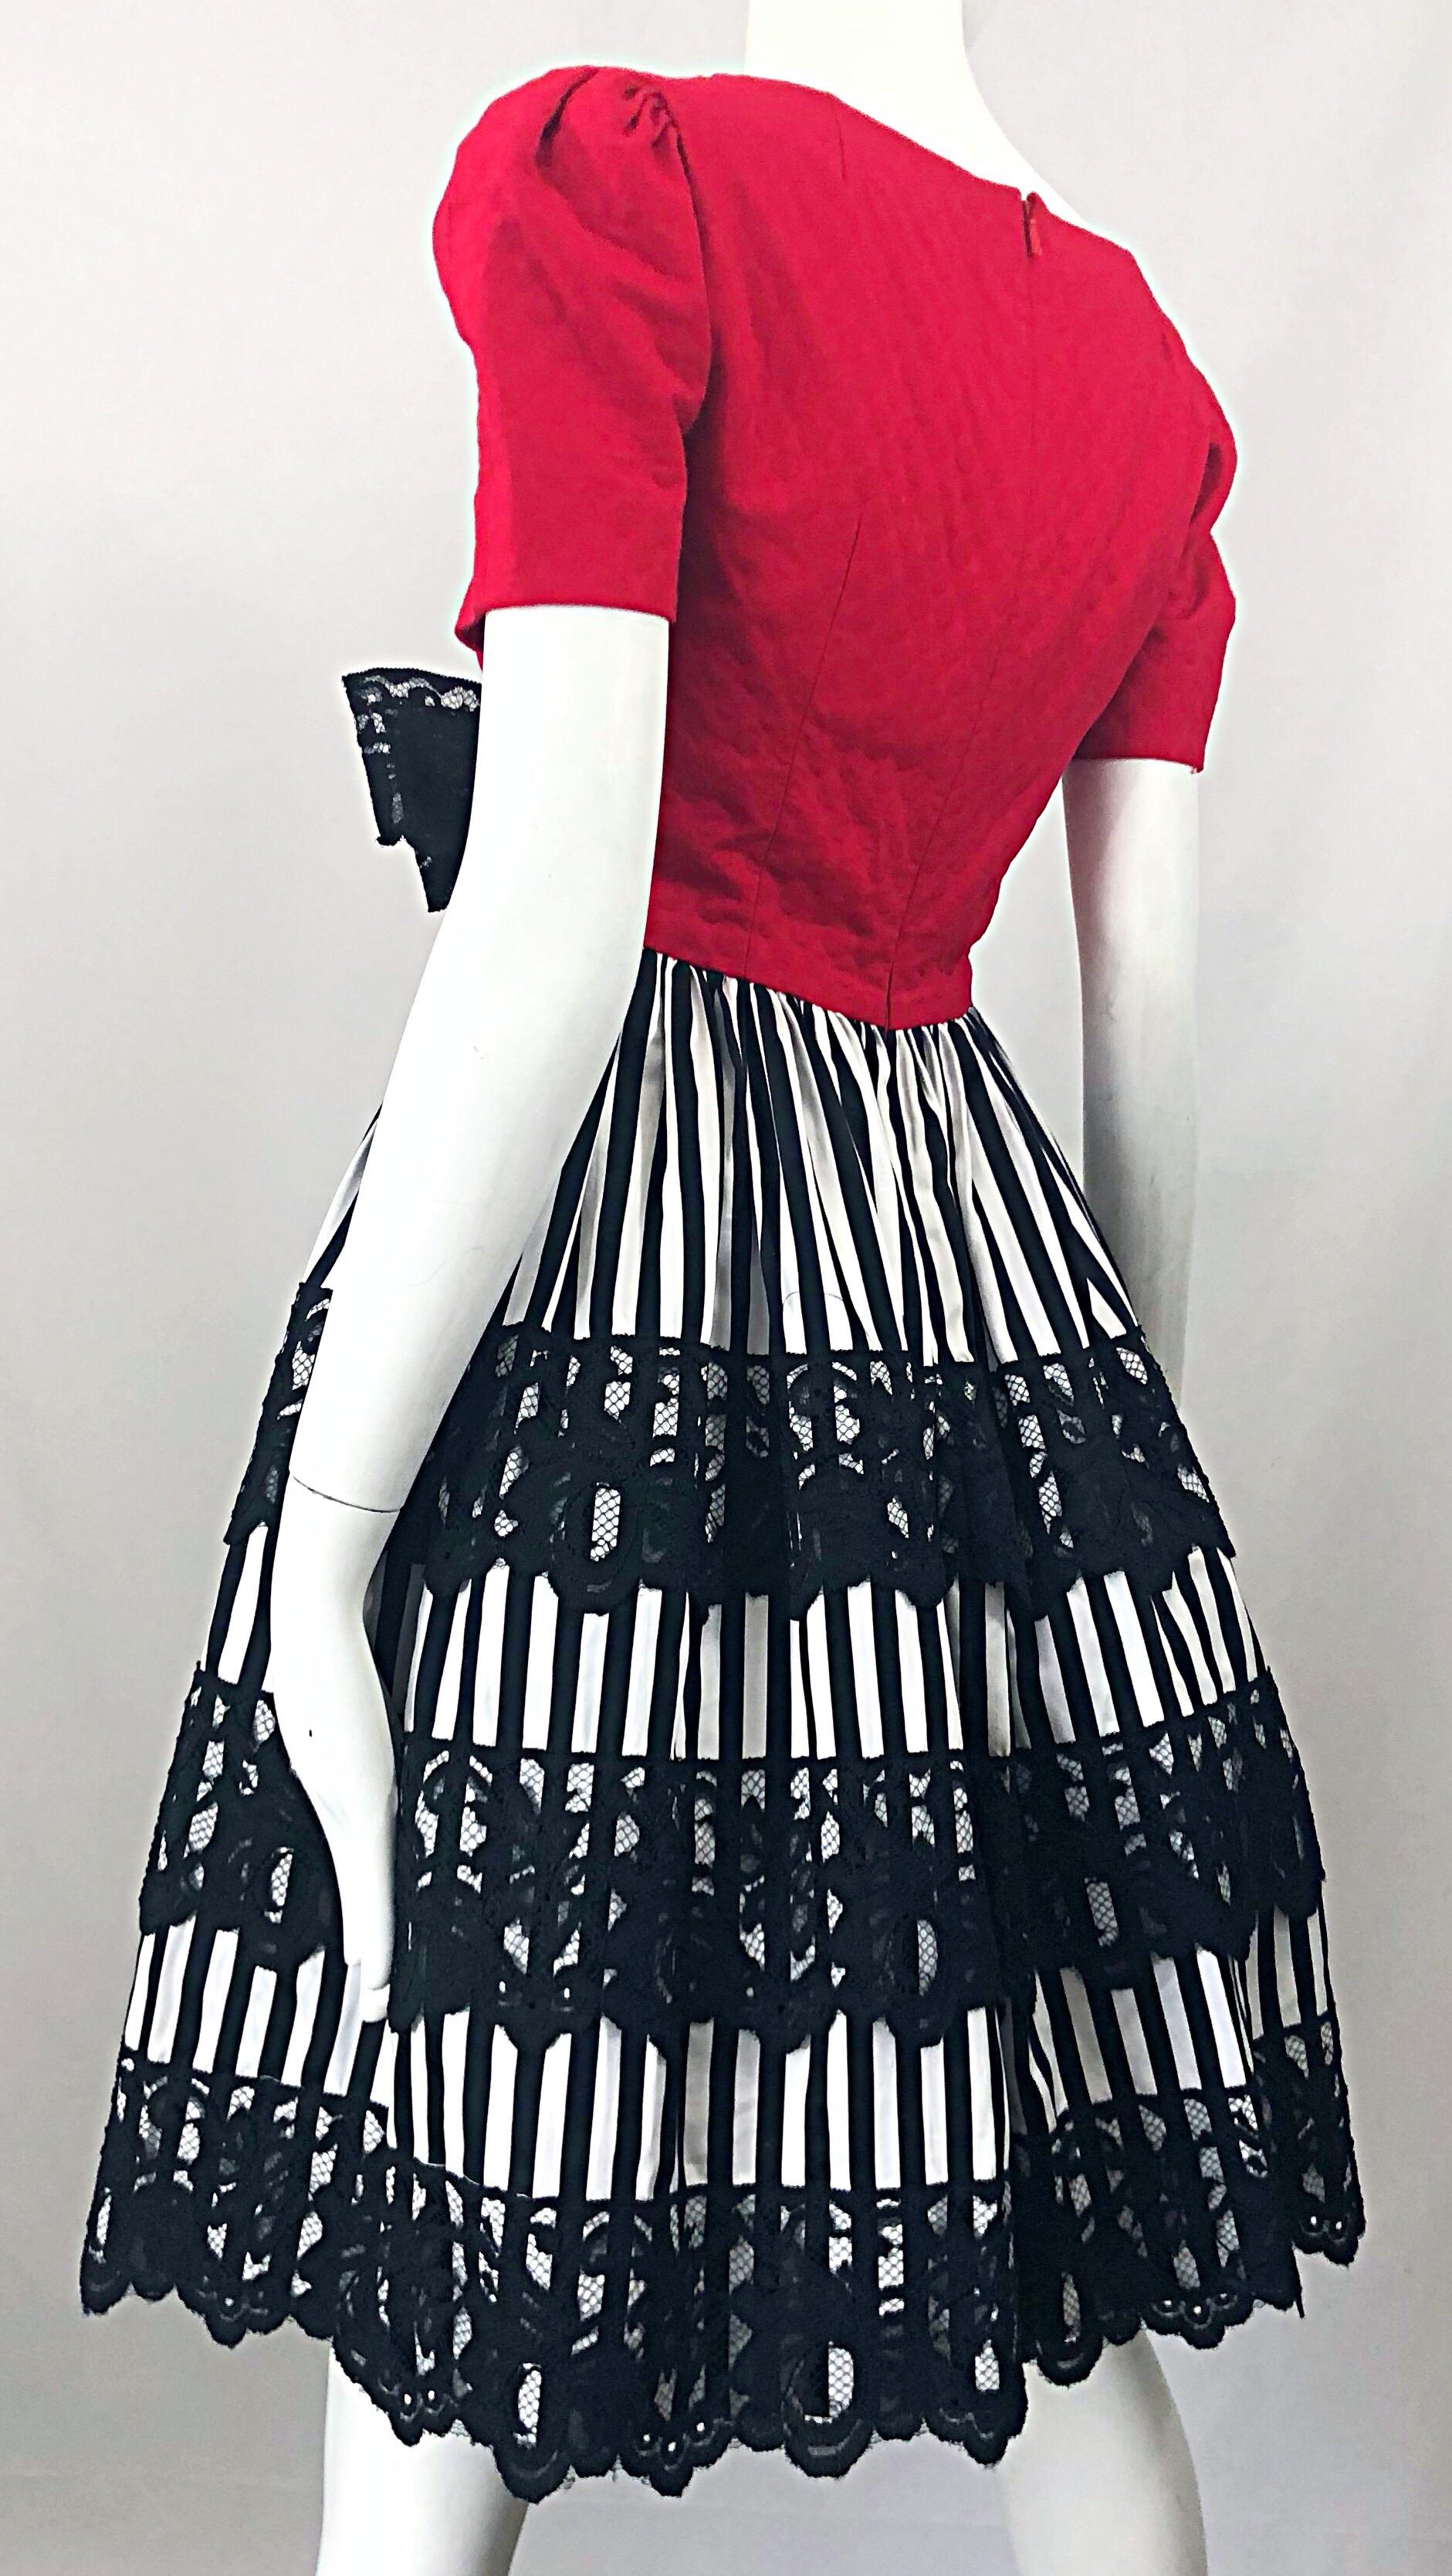 Vintage Adele Simpson 1980s Red Black White Fit n' Flare Empire Bow Lace Dress For Sale 3